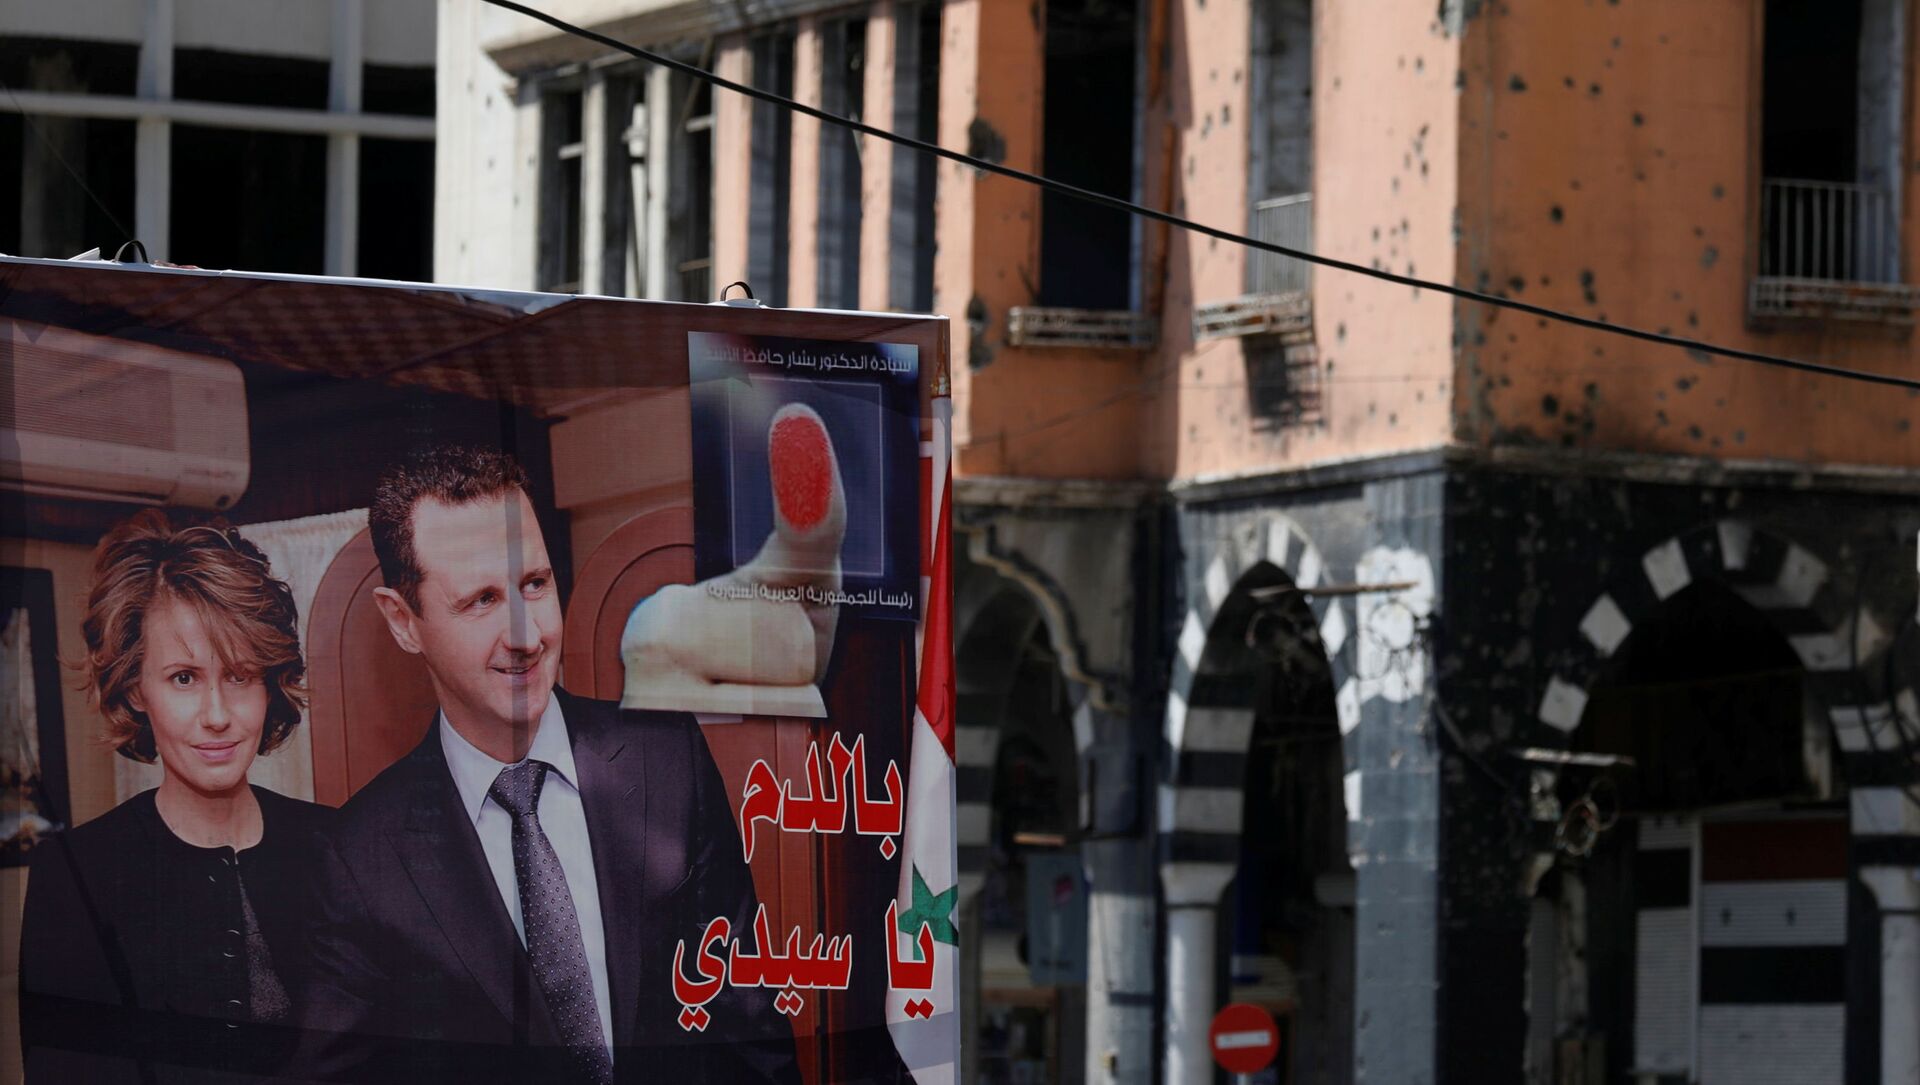 A view shows a banner depicting Syria's President Bashar al-Assad and his wife Asma, near a damaged building, ahead of the May 26 presidential election, in Homs, Syria May 23, 2021. - Sputnik International, 1920, 28.05.2021